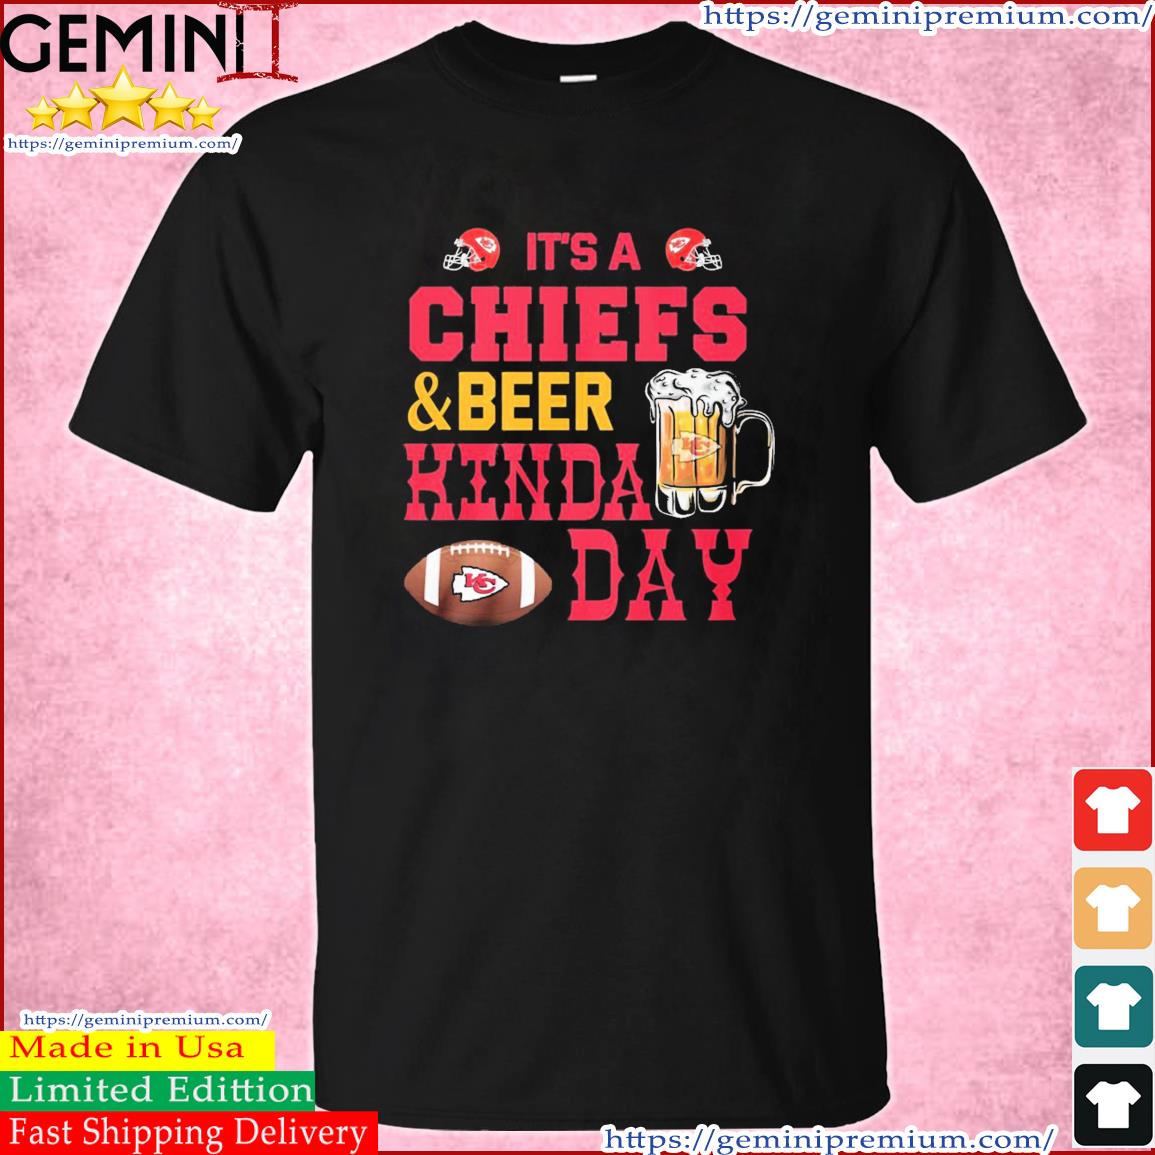 It's A Chiefs & Beer Kinda Day Shirt